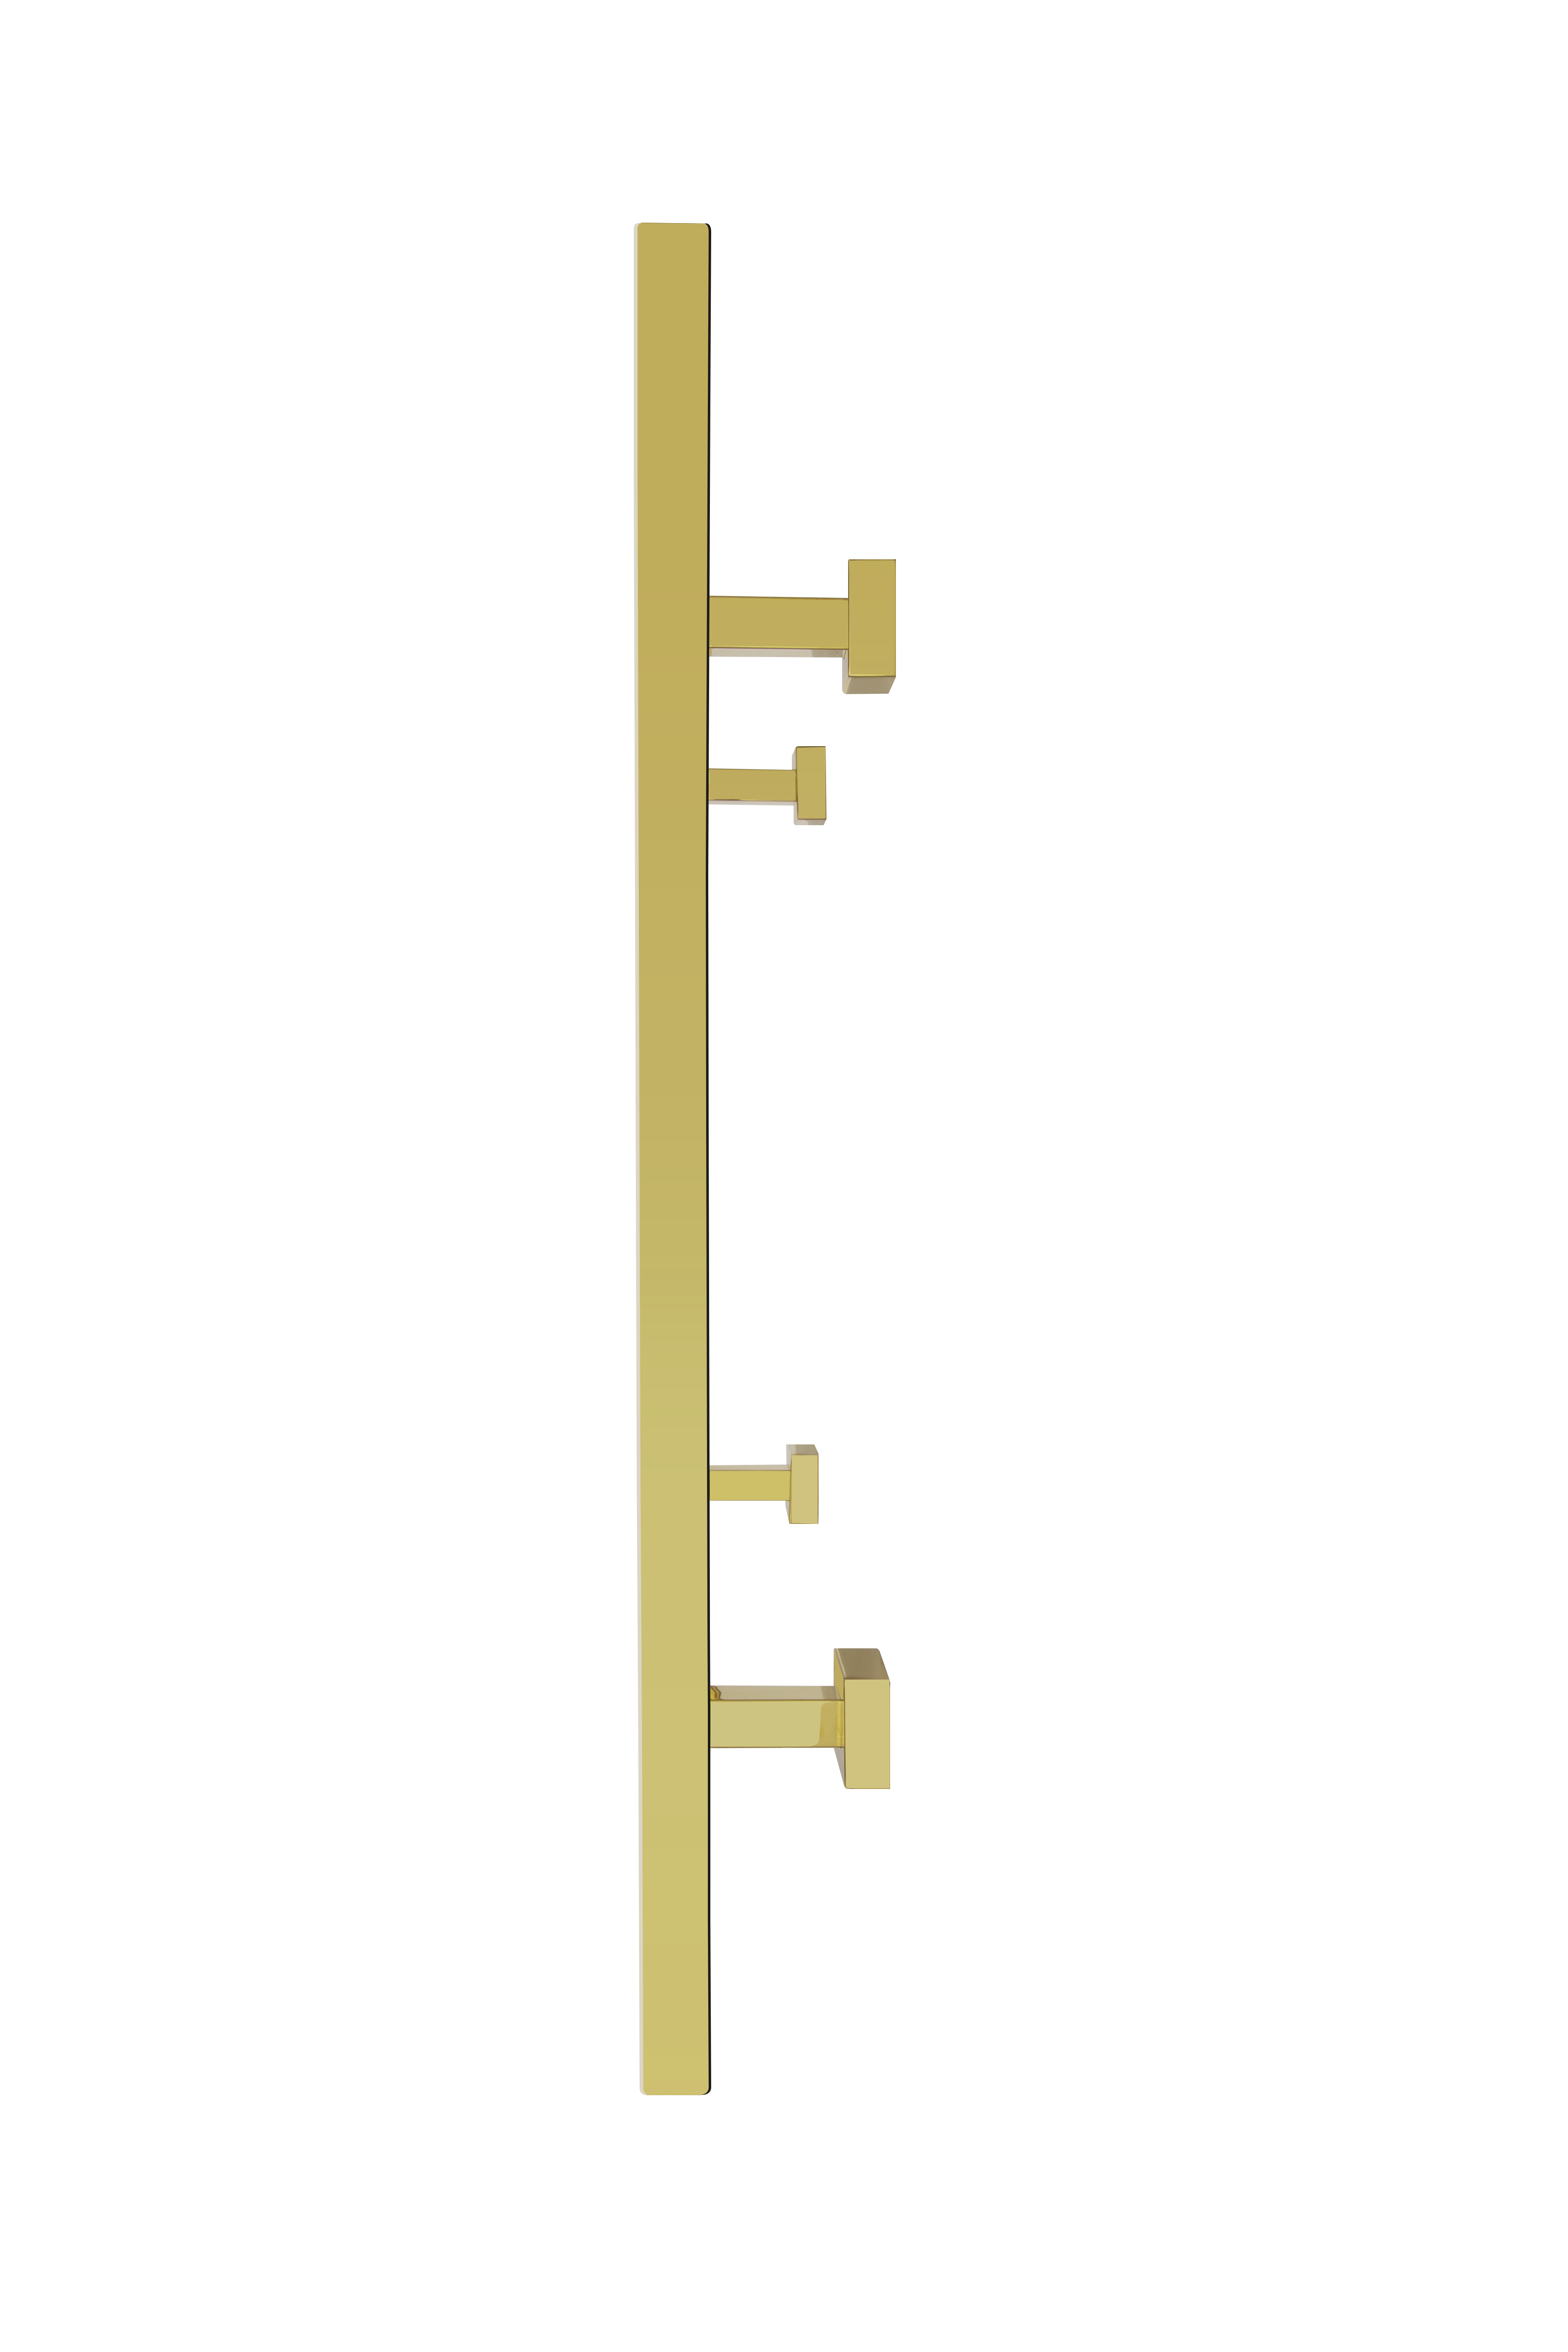 Sierra Towel Warmer, Polished Gold, Dual Connection, 8 Bars